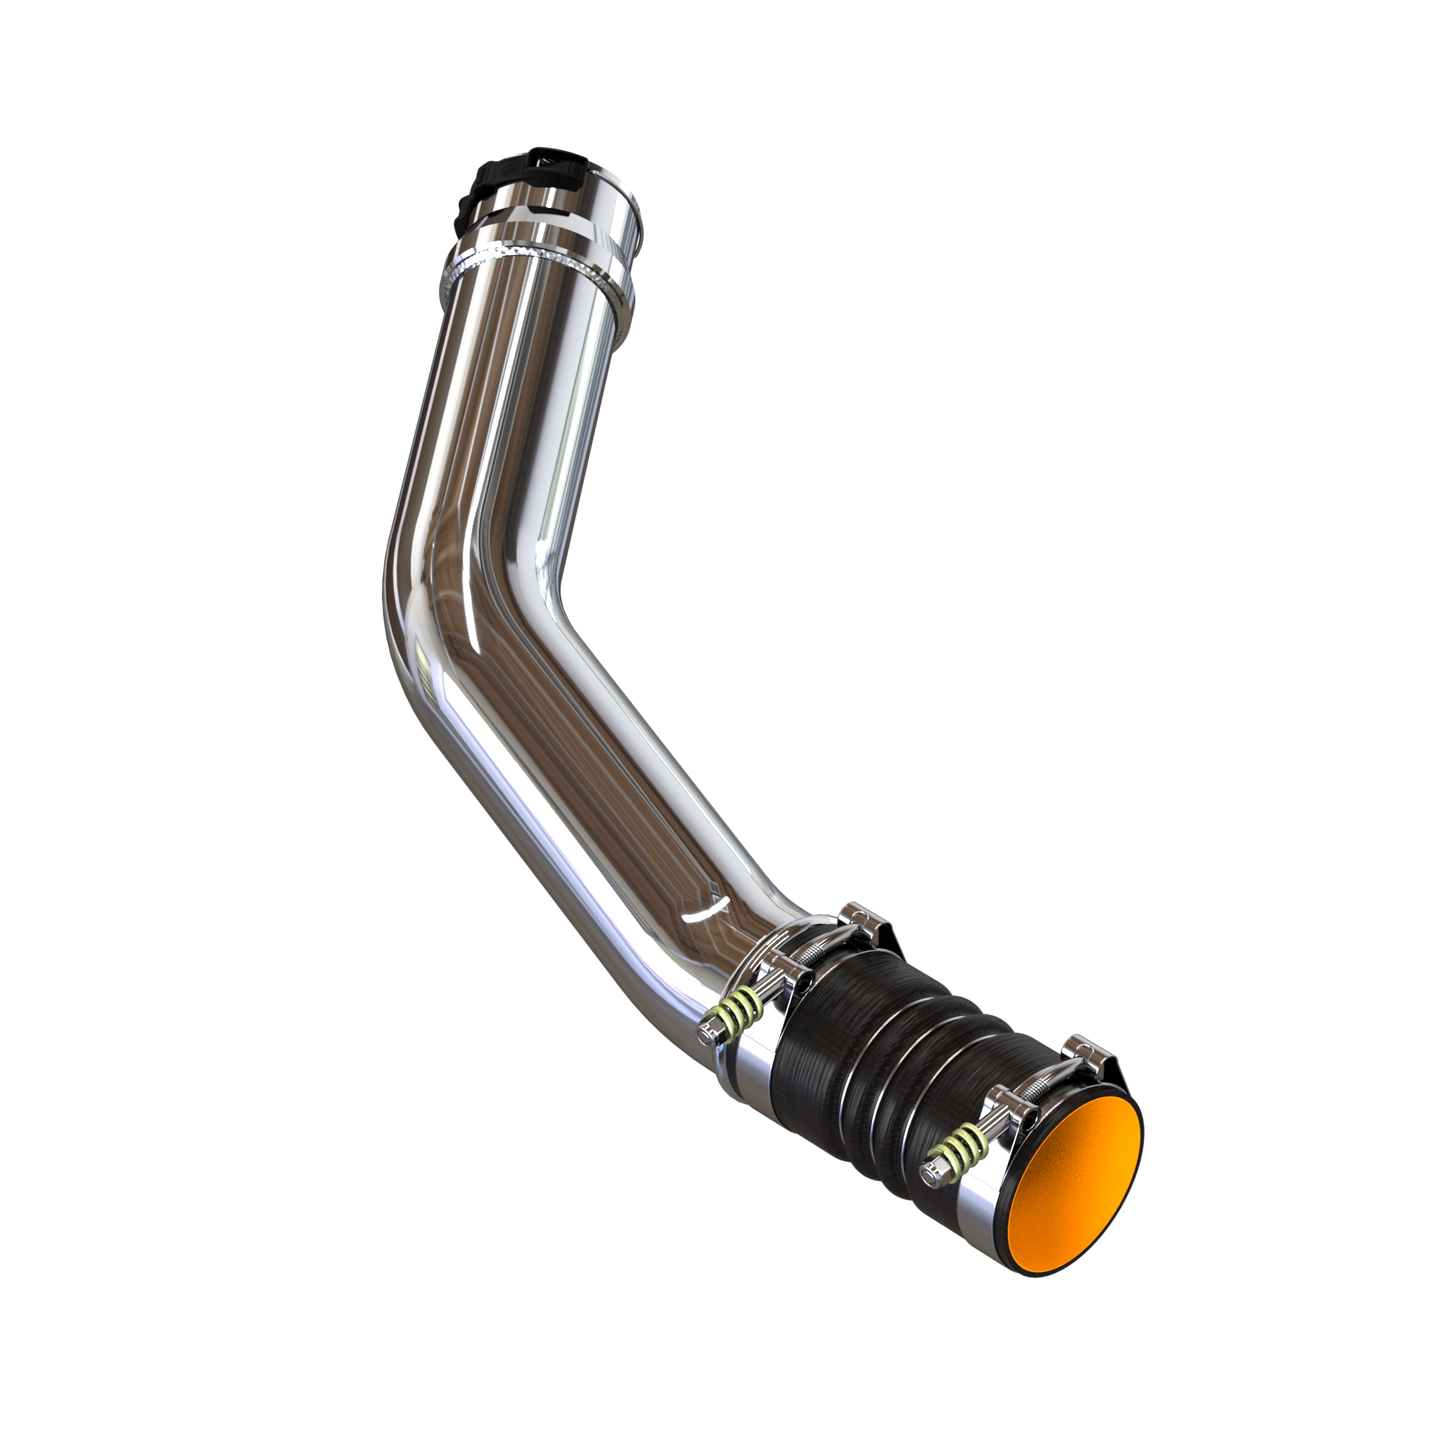  Hot Side Intercooler Pipe for 2011-2015 Ford Powerstroke 6.7L